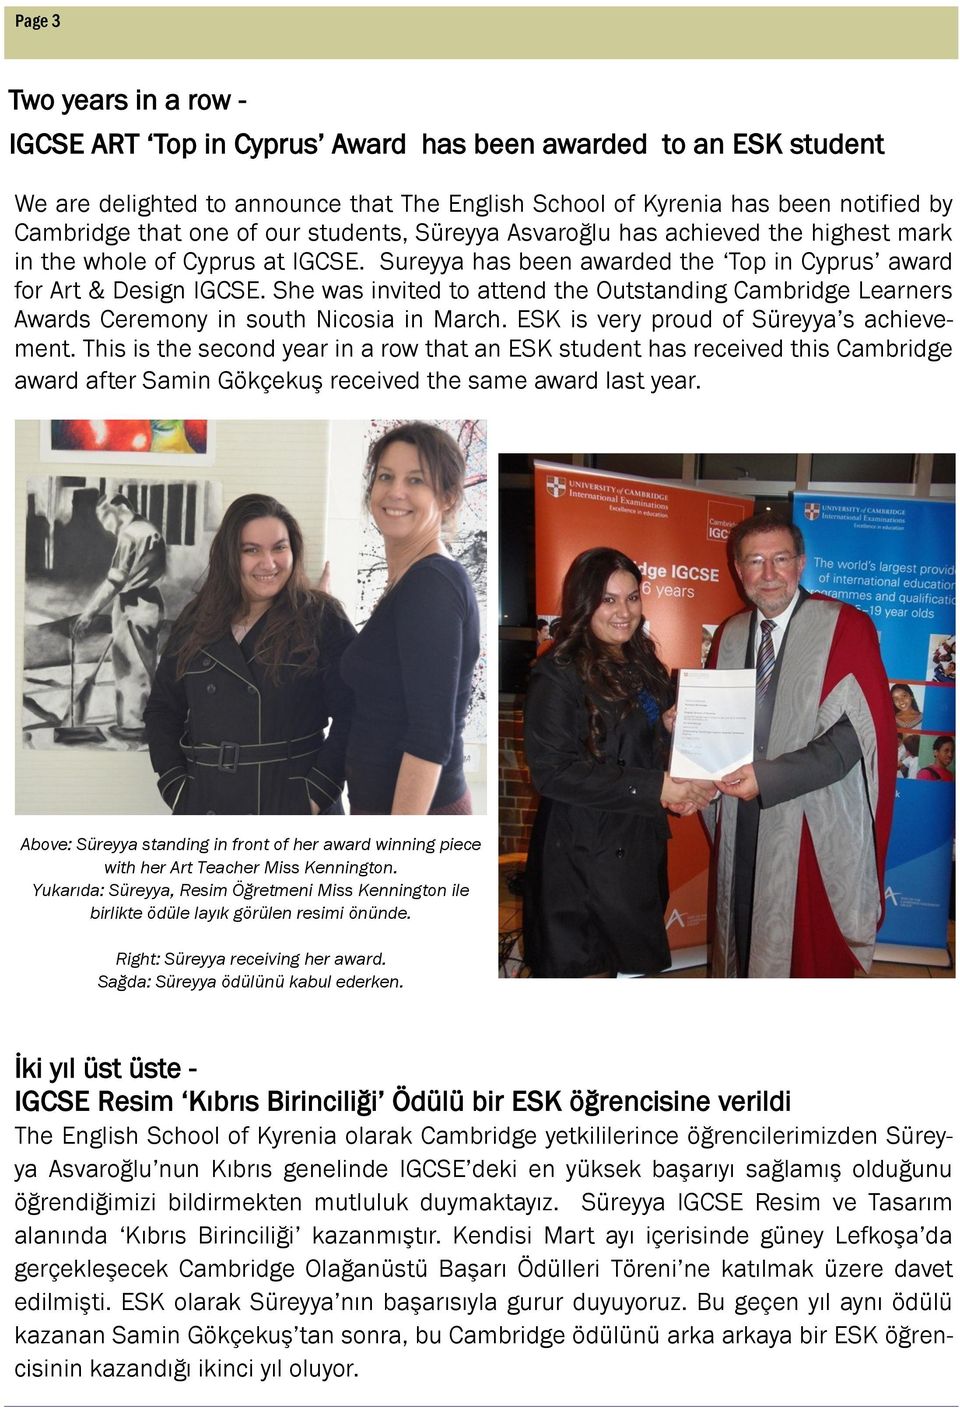 She was invited to attend the Outstanding Cambridge Learners Awards Ceremony in south Nicosia in March. ESK is very proud of Süreyya s achievement.